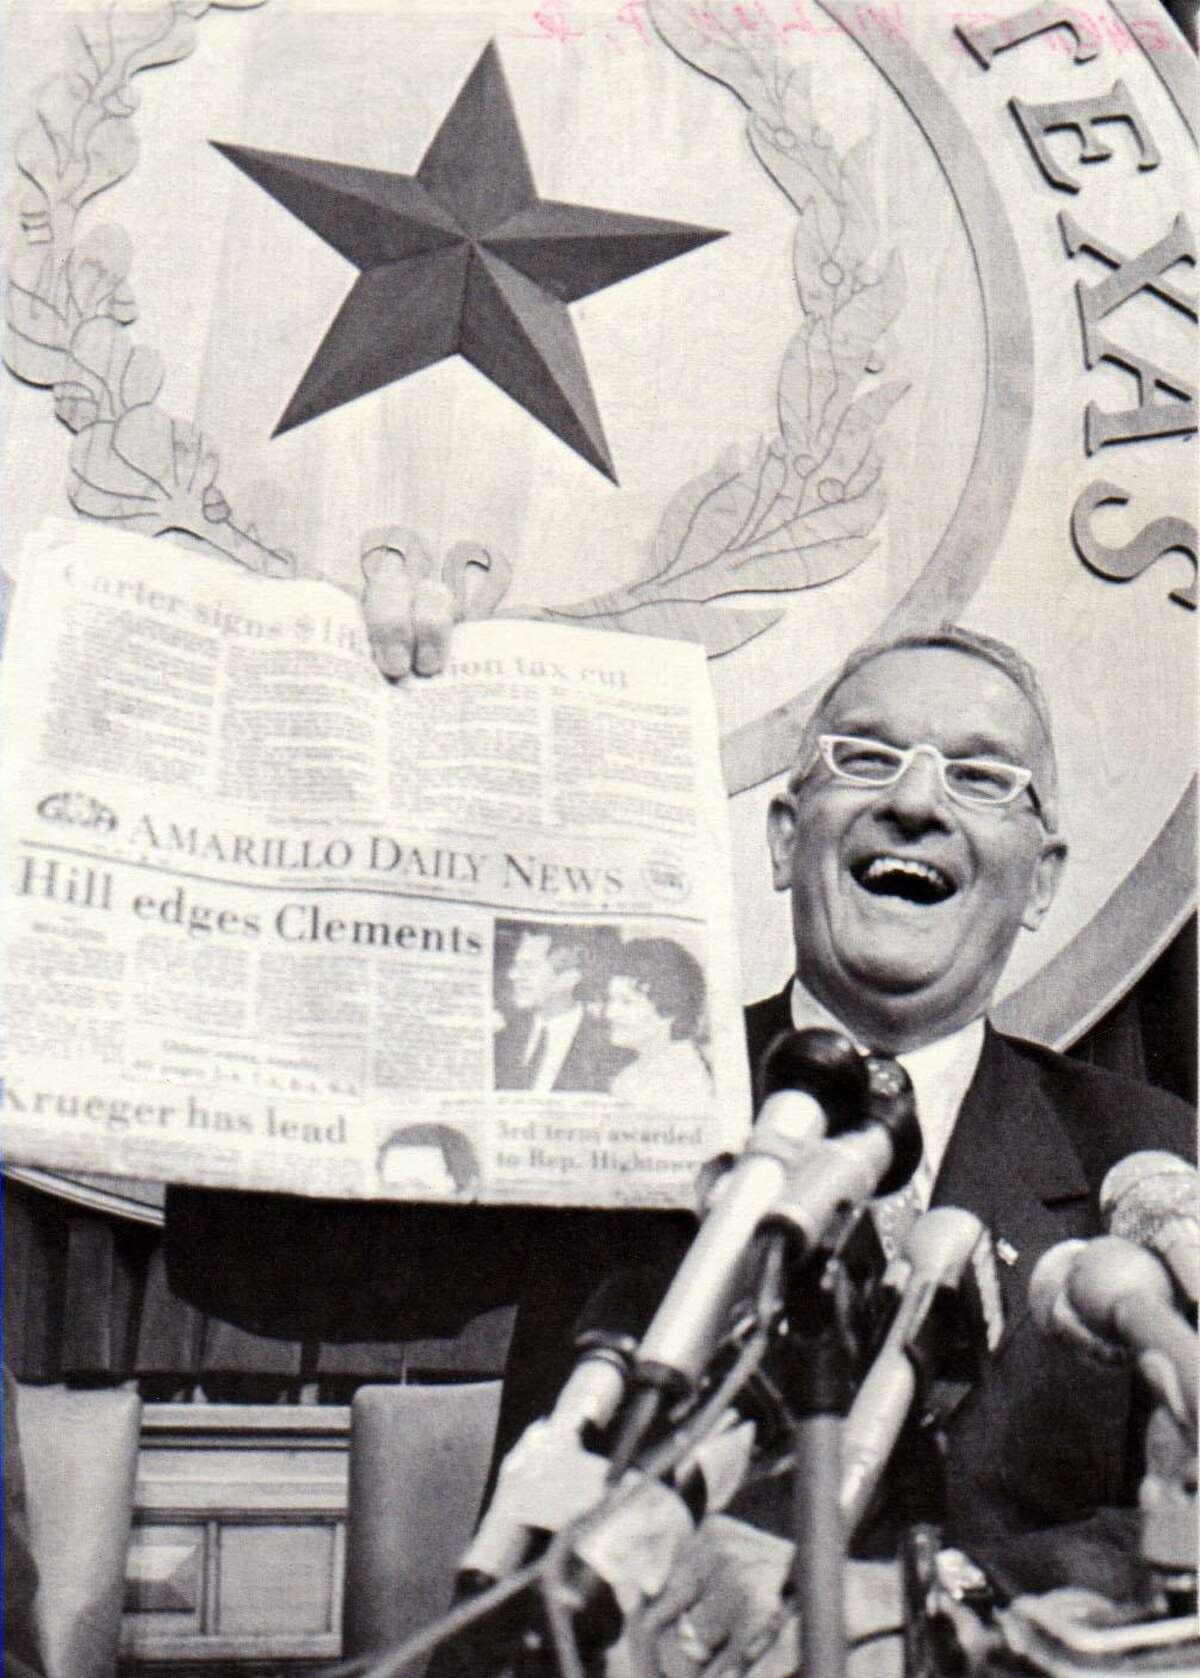 Successful Republican candidate for Governor Bill Clements holds up a newspaper [ The Amarillo Daily News ] bearing a headline reminiscent of the Truman-Dewey headline in 1948. The newspaper proclaims "Hill edges Clements." UPI photo